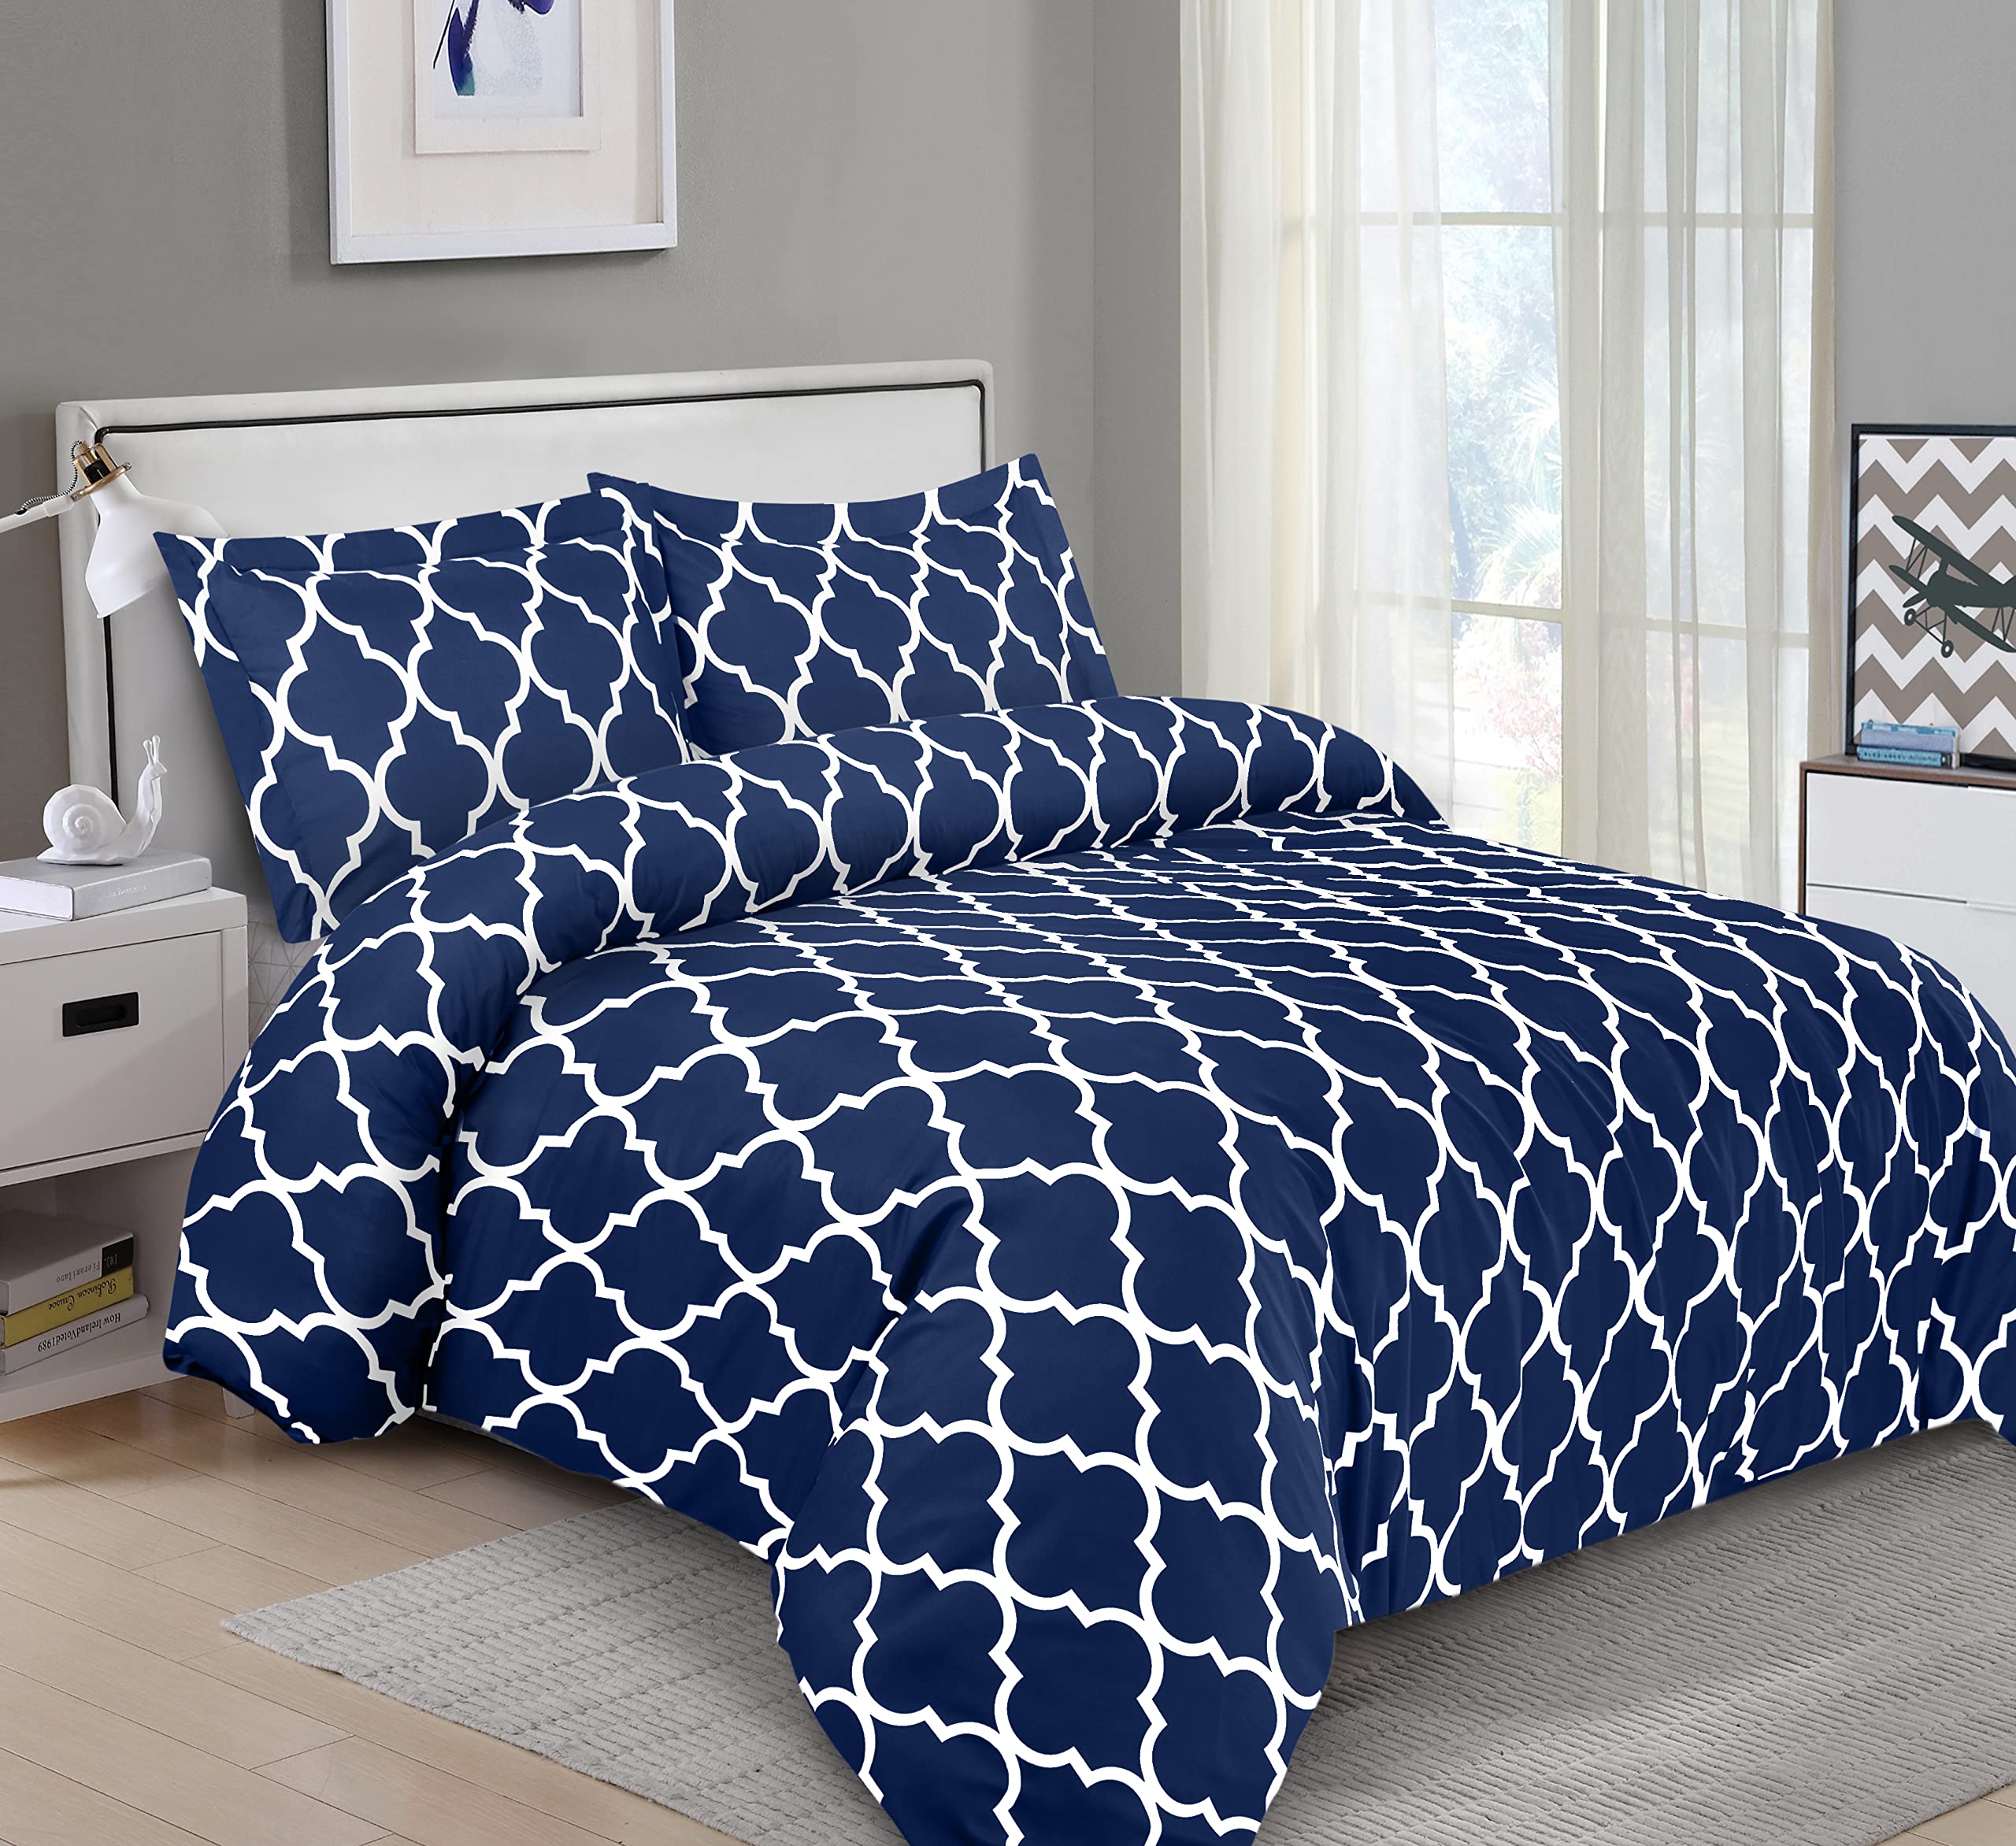 Book Cover Utopia Bedding Duvet Cover Queen Size Set - 1 Duvet Cover with 2 Pillow Shams - 3 Pieces Comforter Cover with Zipper Closure - Ultra Soft Brushed Microfiber, 90 X 90 Inches (Queen, Quatrefoil Navy) Queen Printed Navy